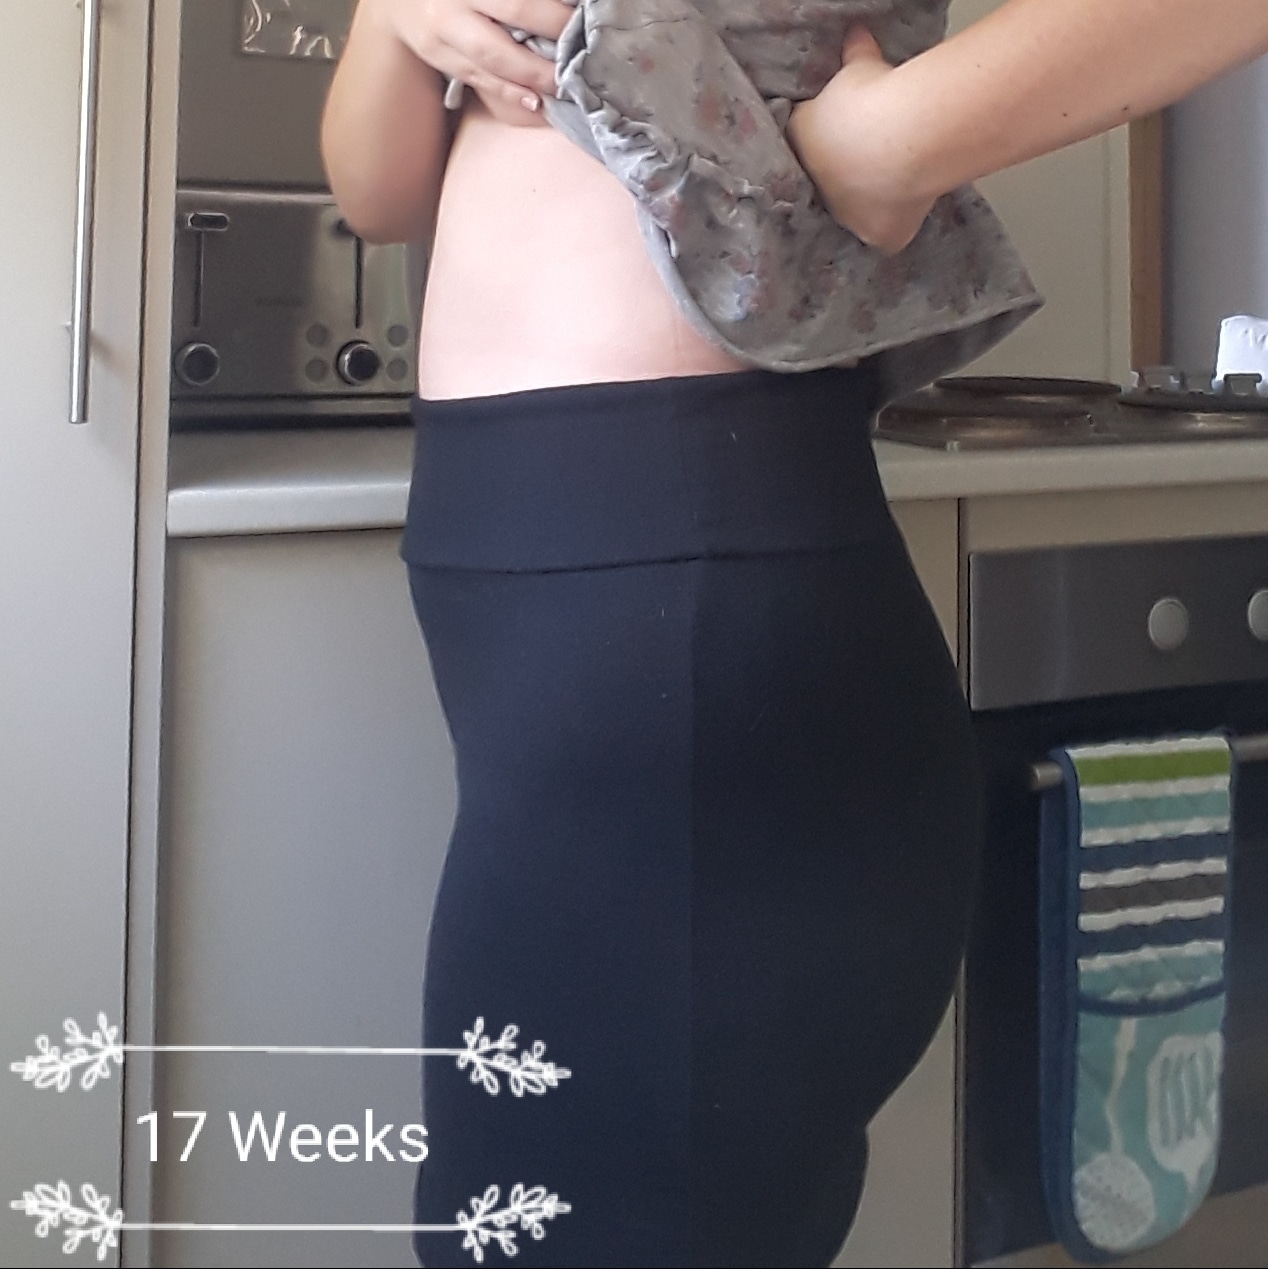 Baby Bump disappearing